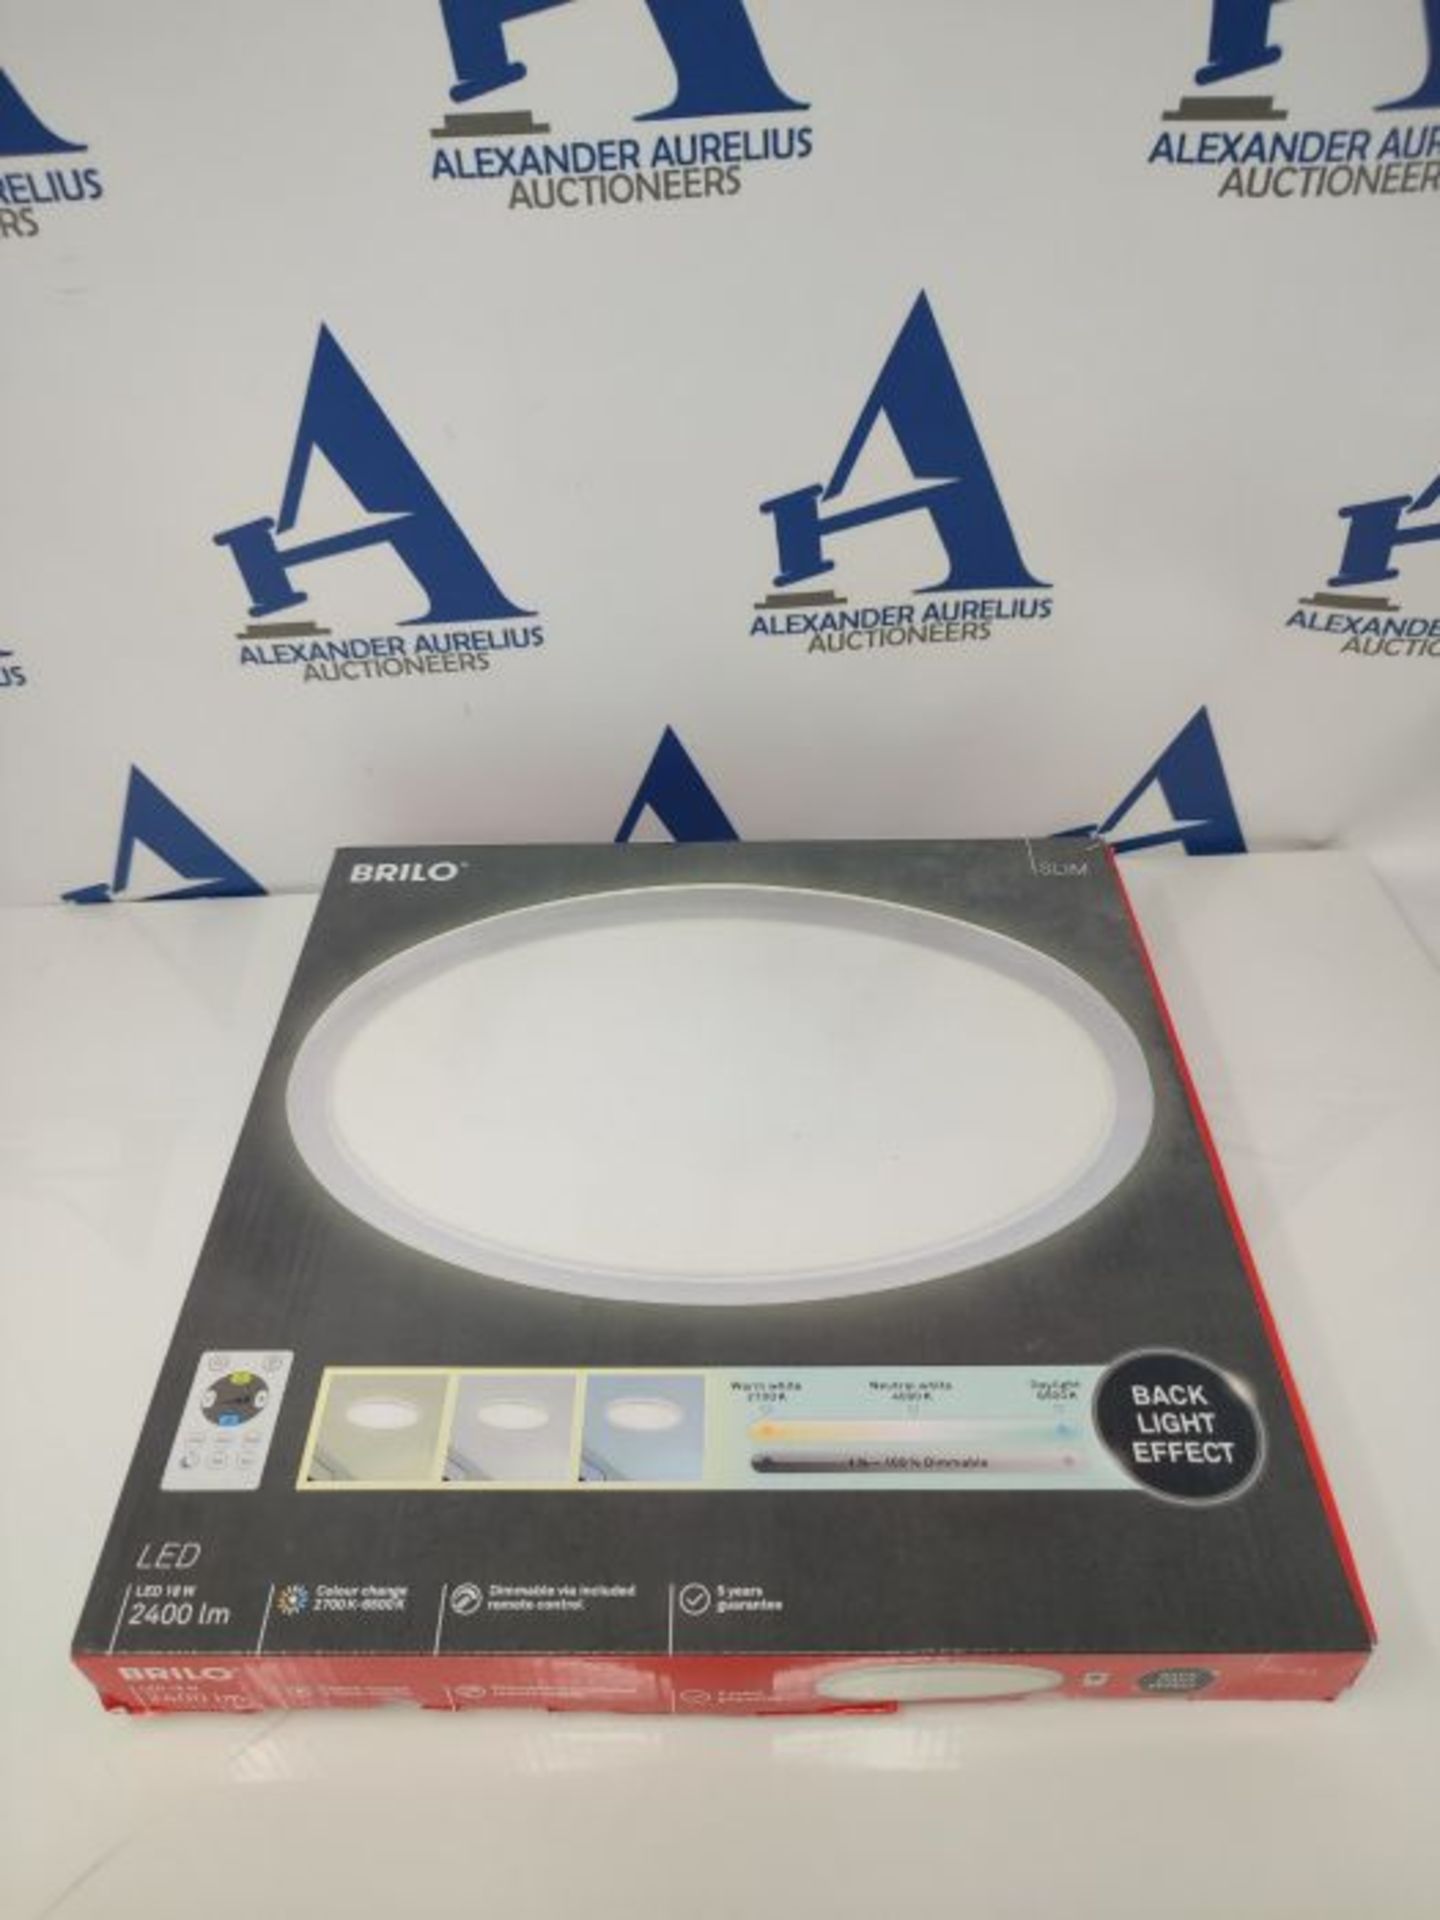 Briloner Leuchten 7079-016 LED Panel Ceiling Light Dimmable with Backlight with Remote - Image 5 of 6